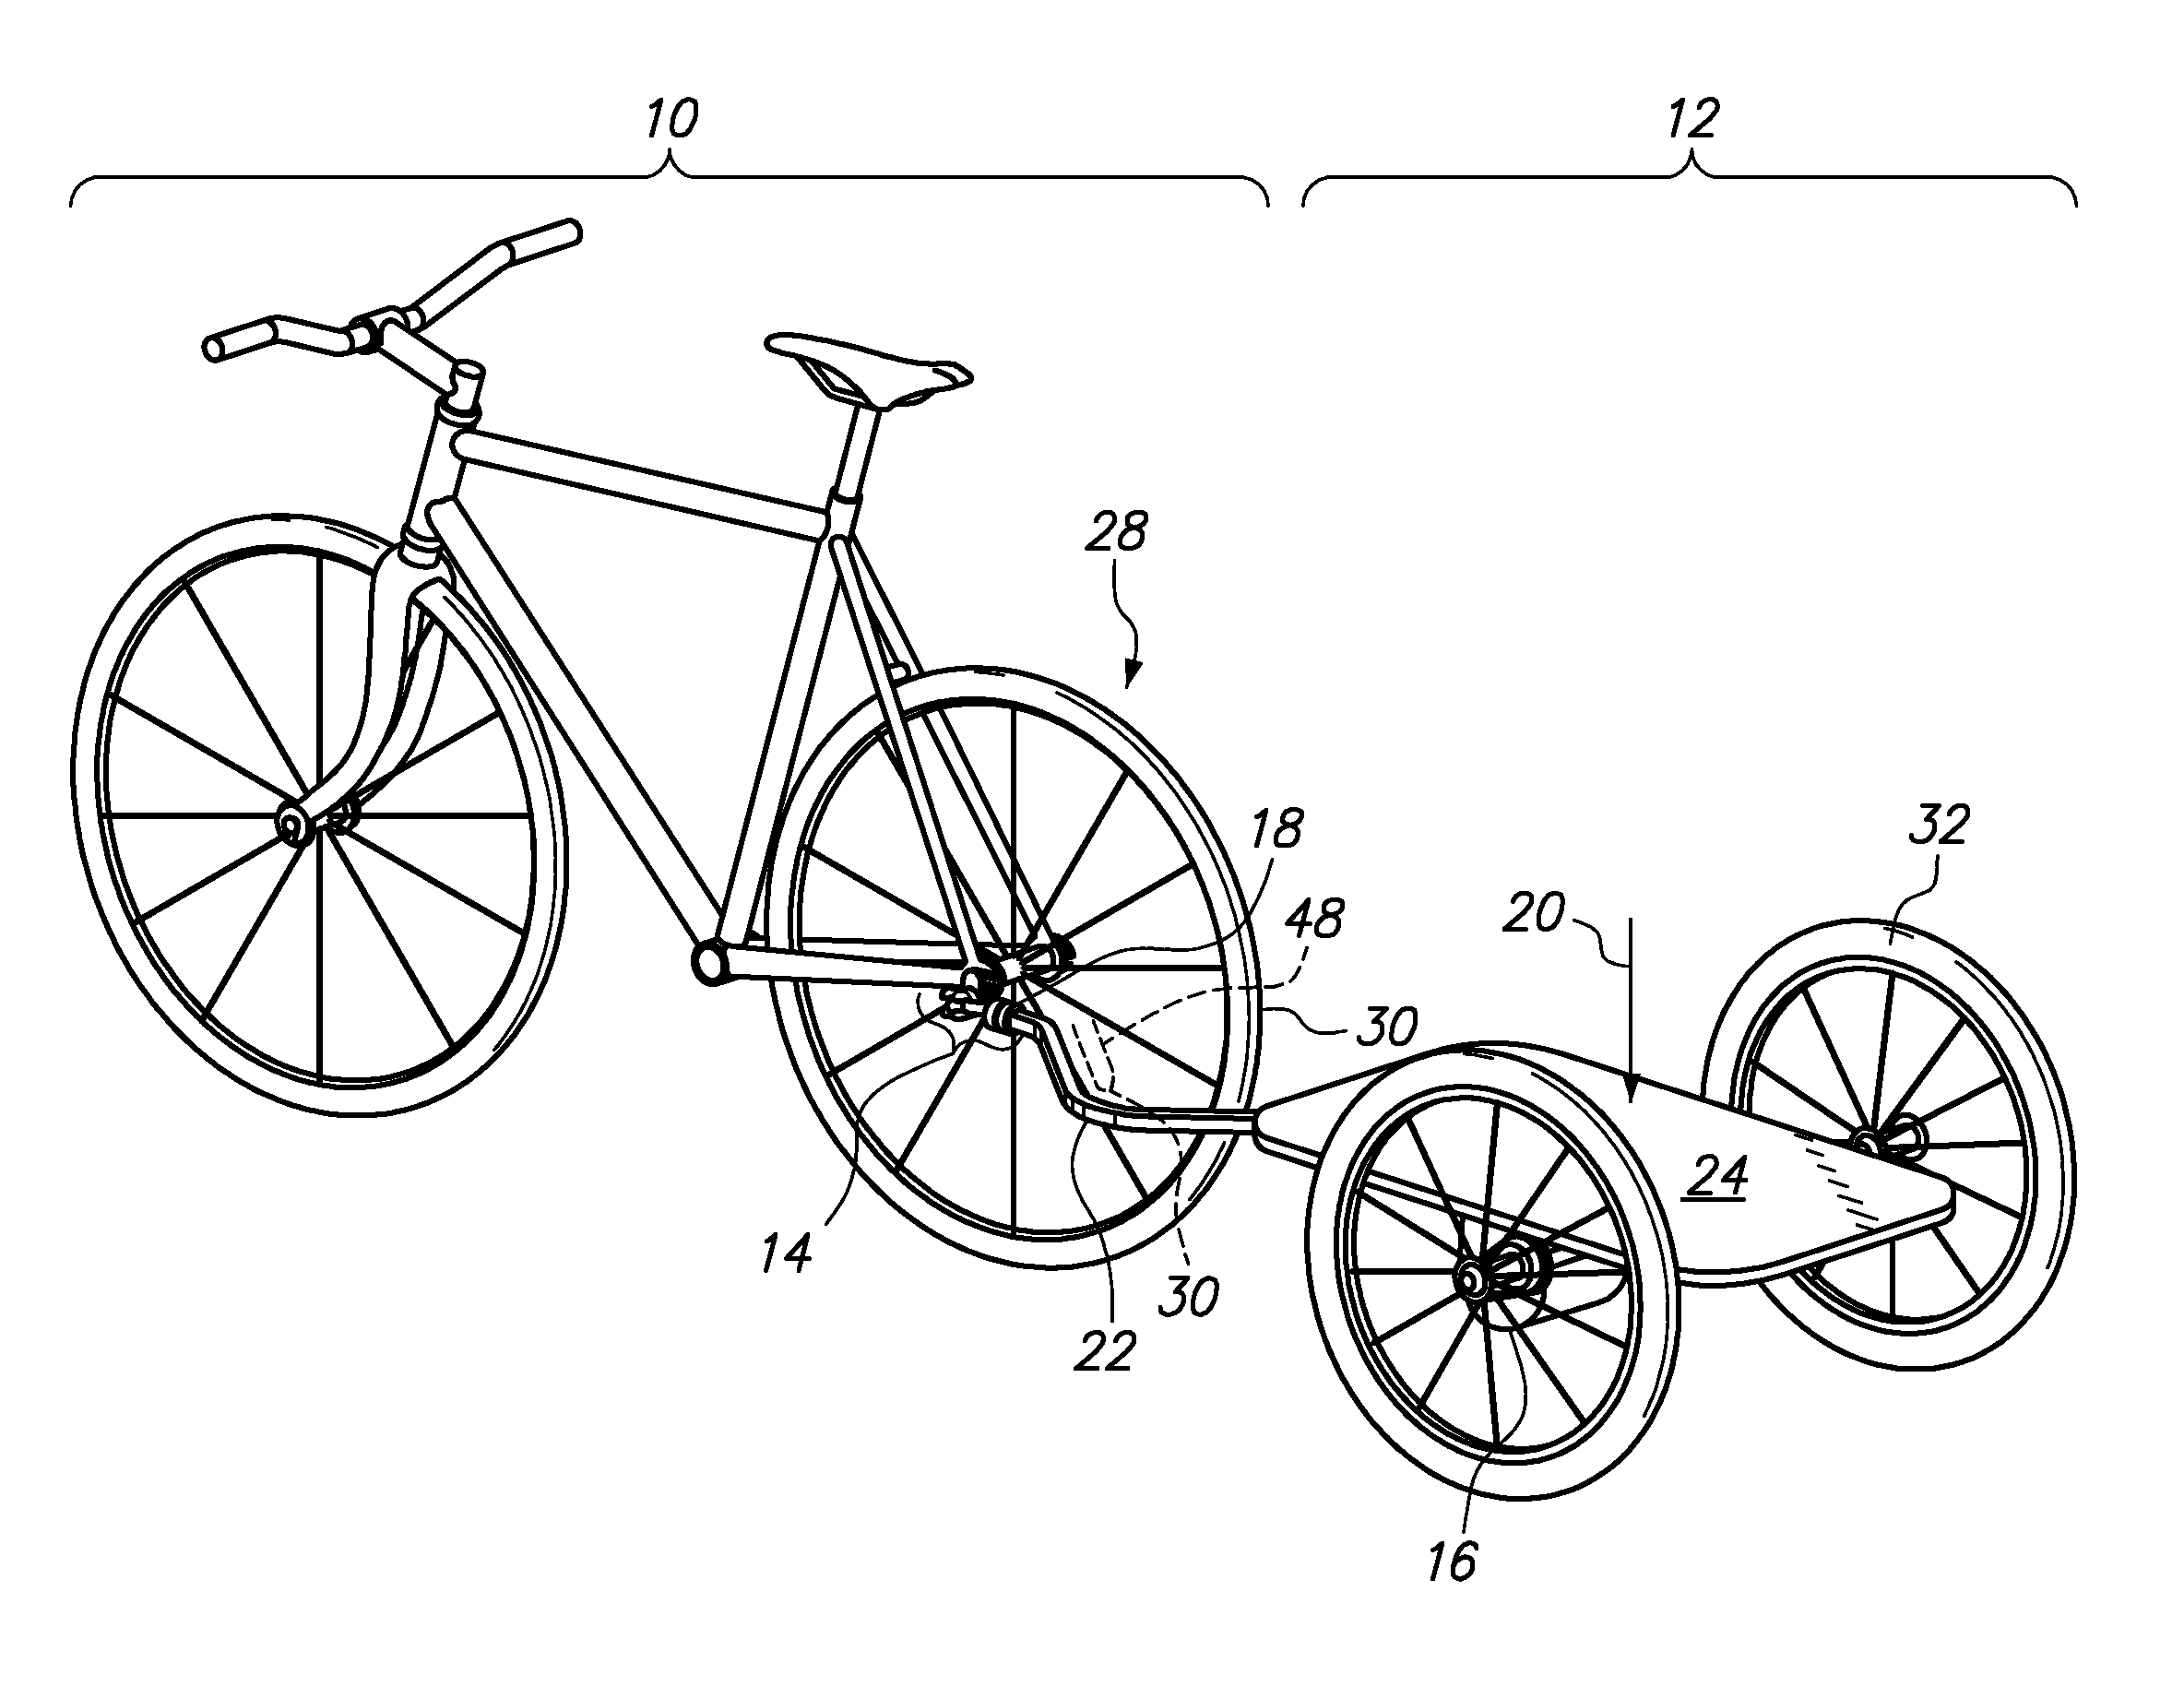 Motor Powered Bicycle Trailer with Integral Hitch Force Metering